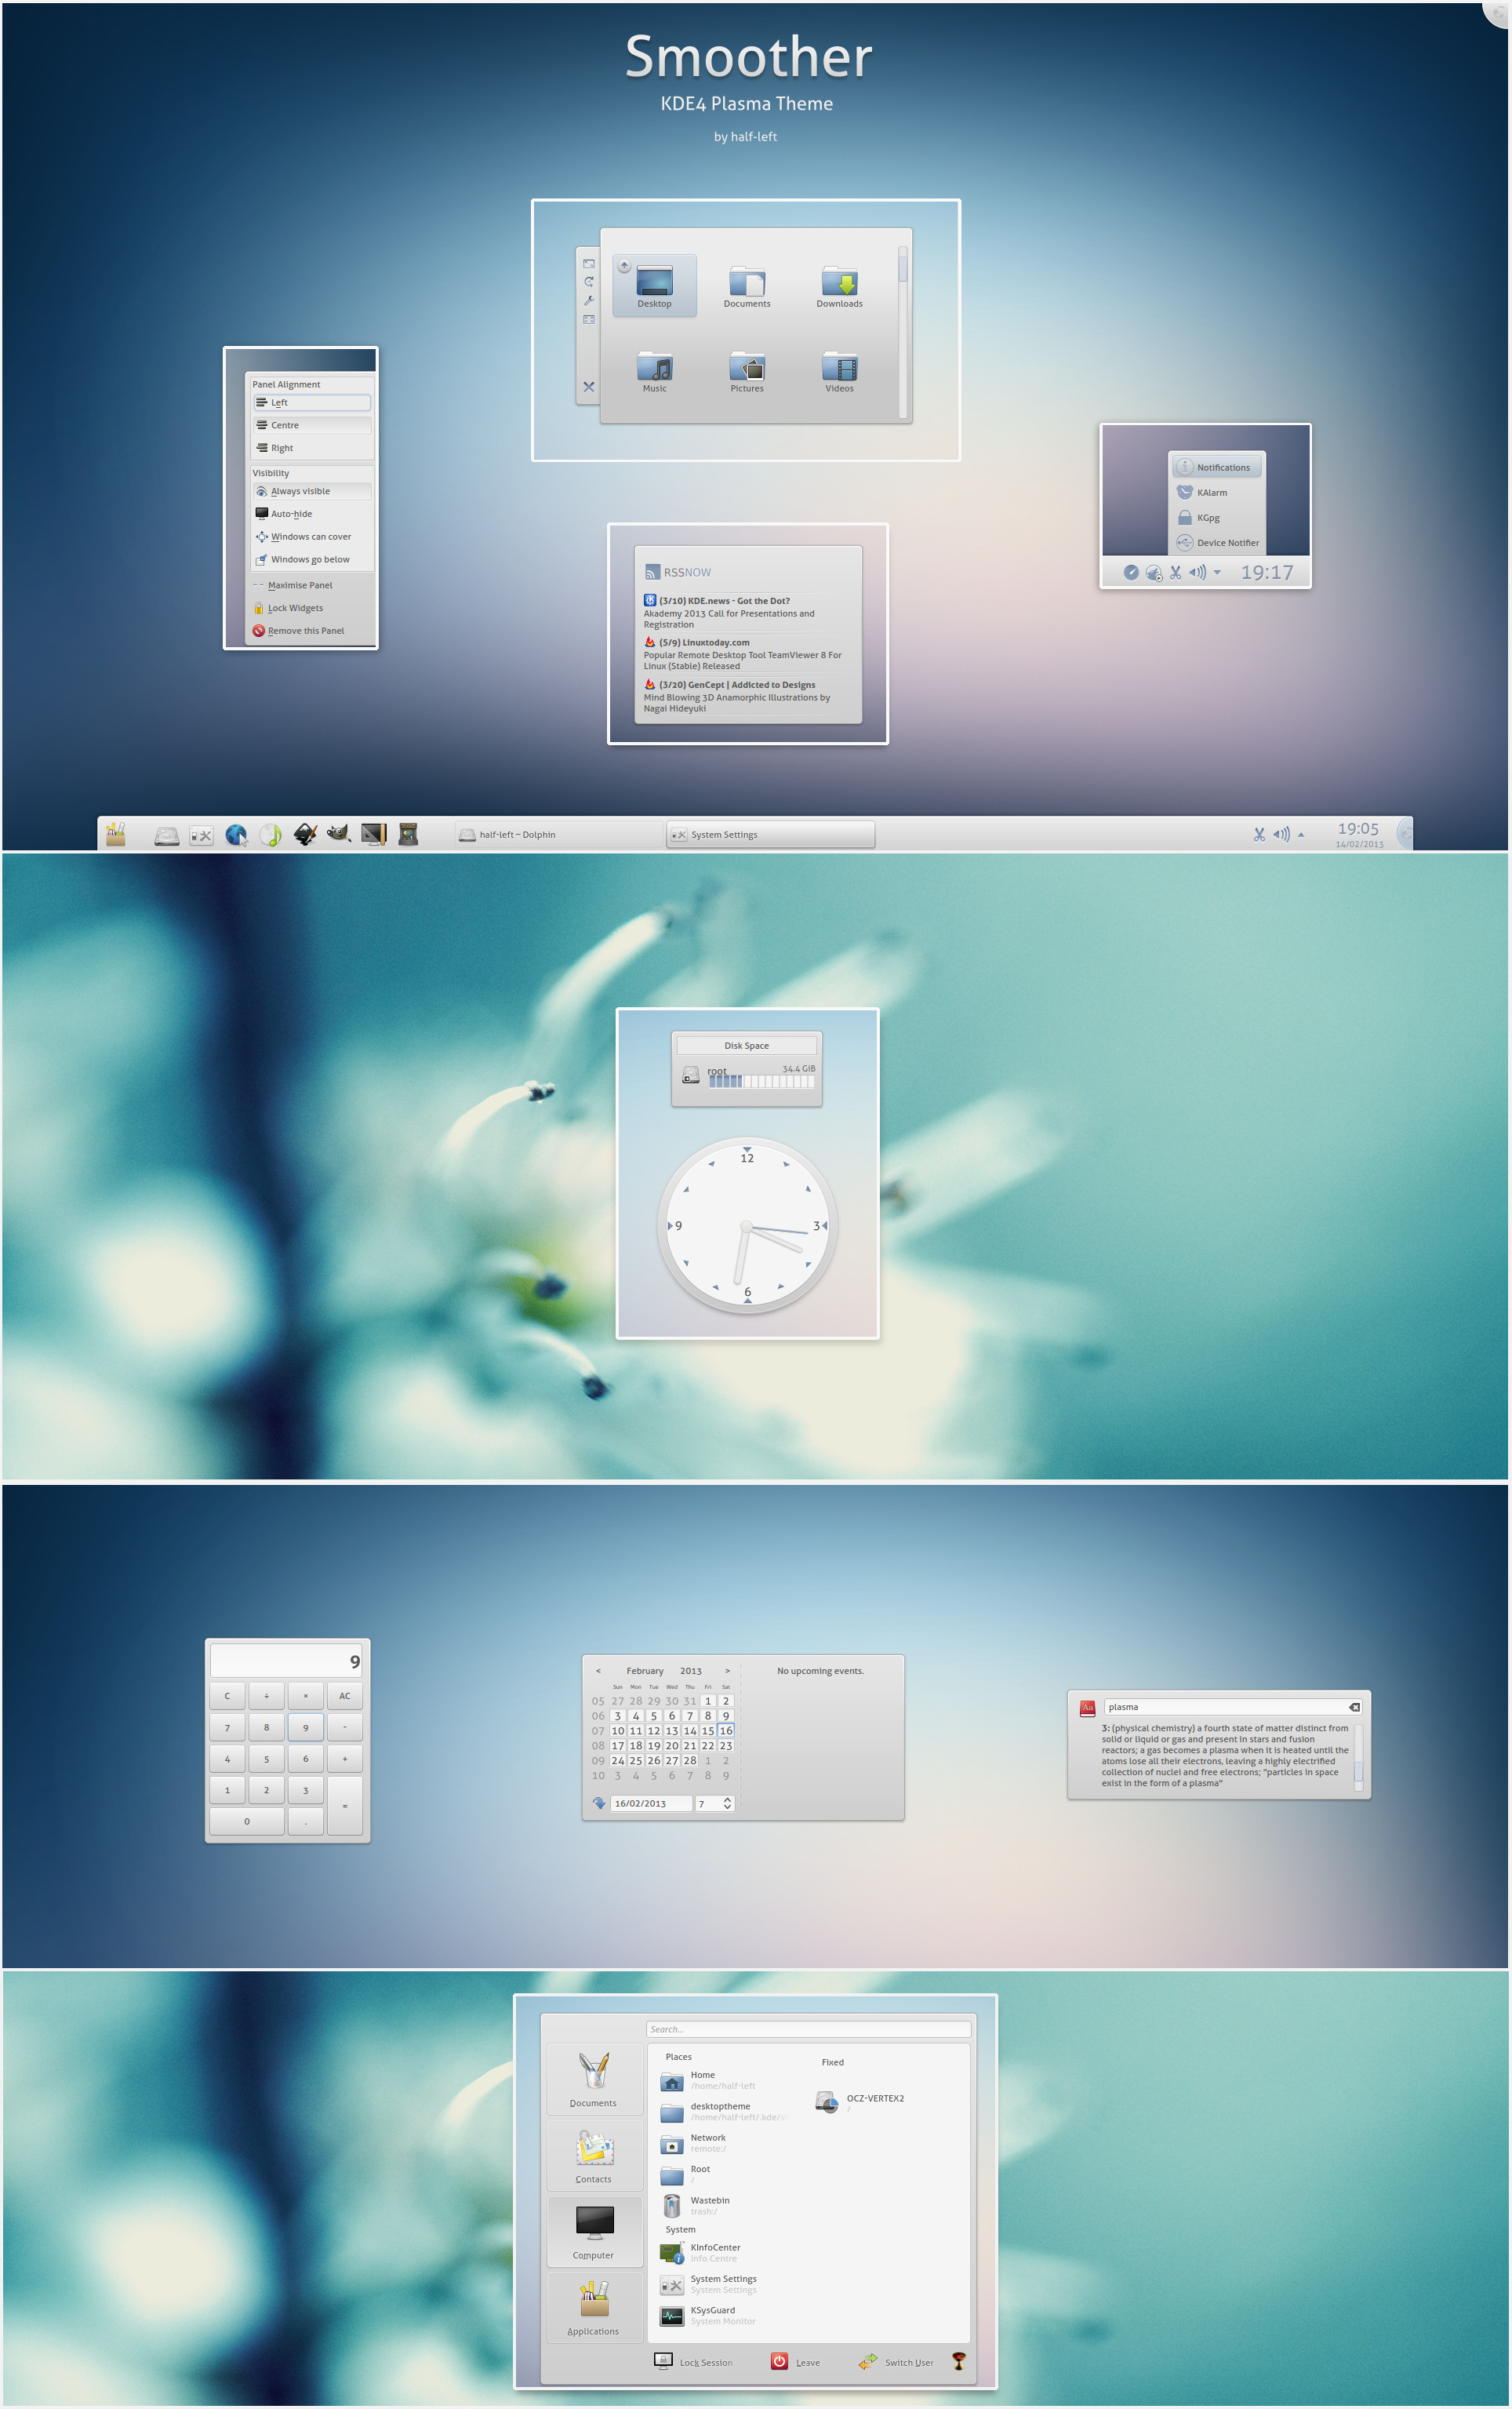 KDE4 - Smoother